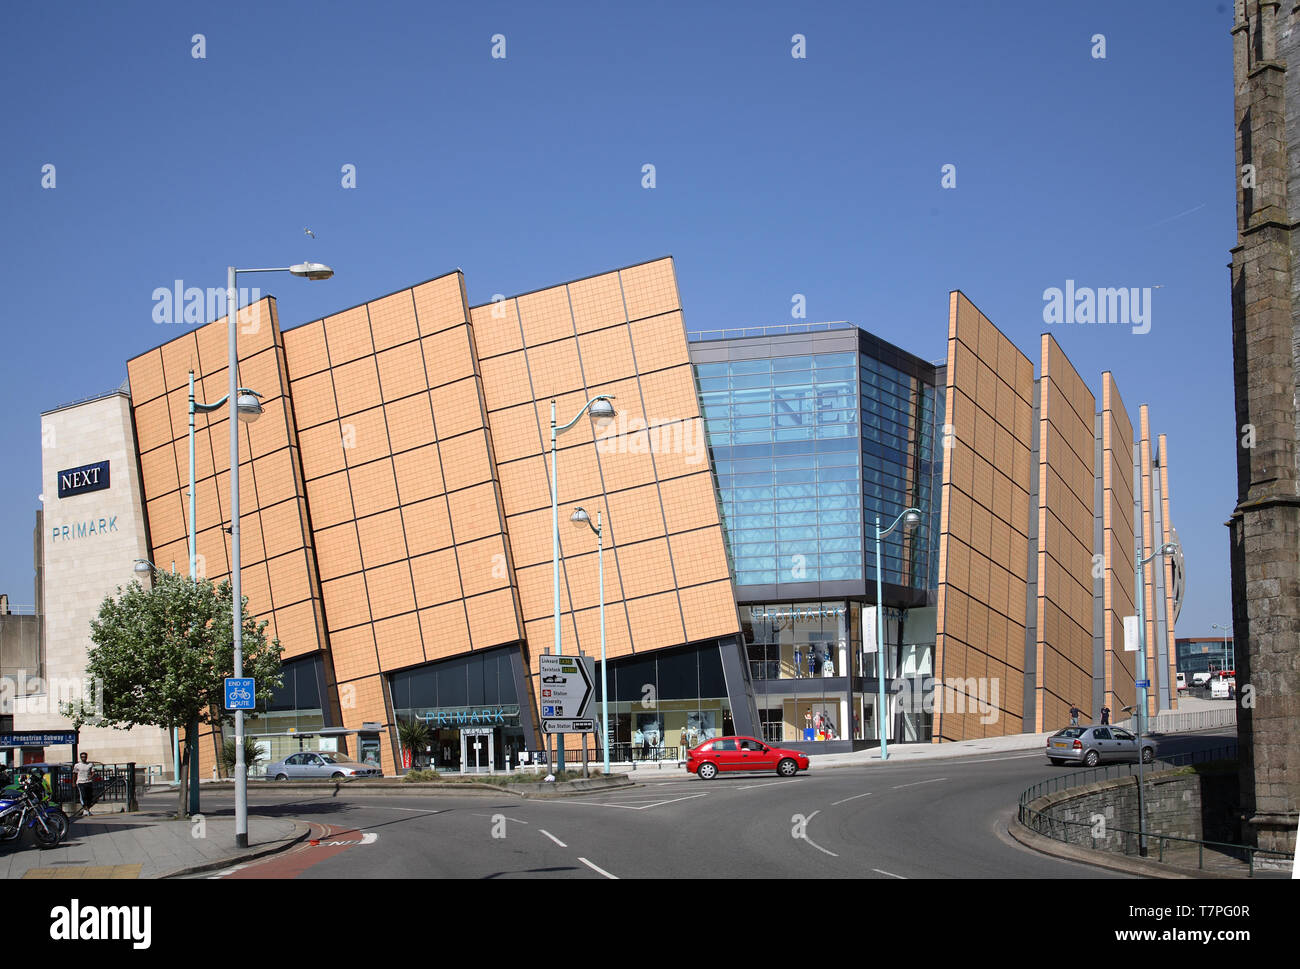 Exterior view of the Drake Circus shopping centre, Plymouth. Opened in 2006, designed by Chapman Taylor architects. Stock Photo